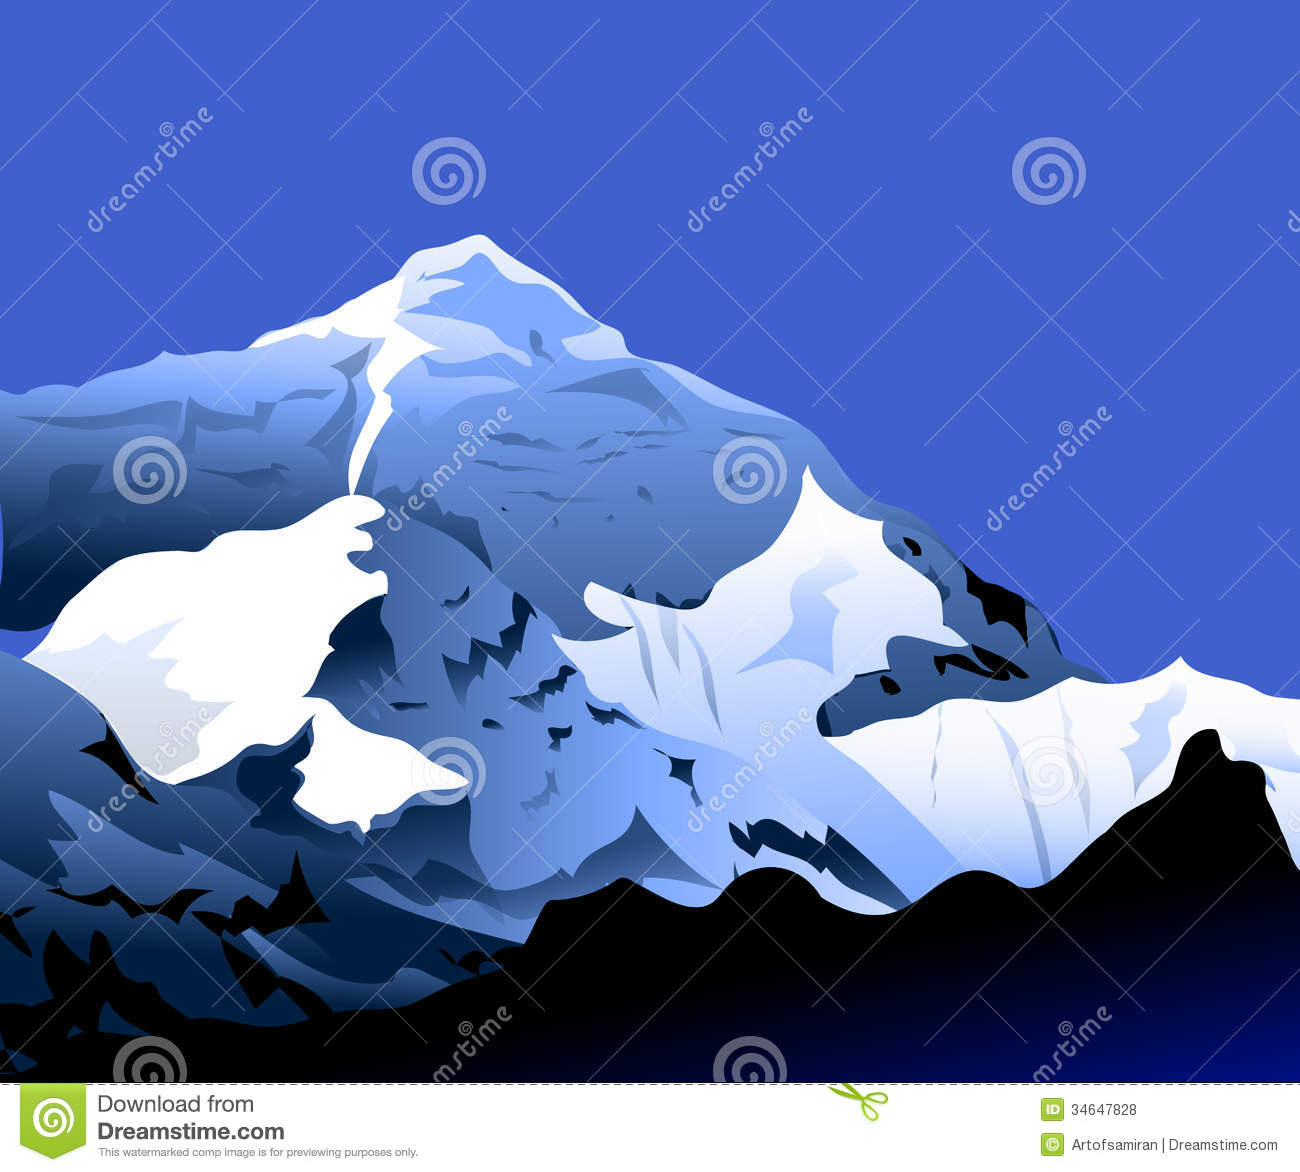 Mt Everest At Morning Royalty Free Stock Photos   Image  34647828